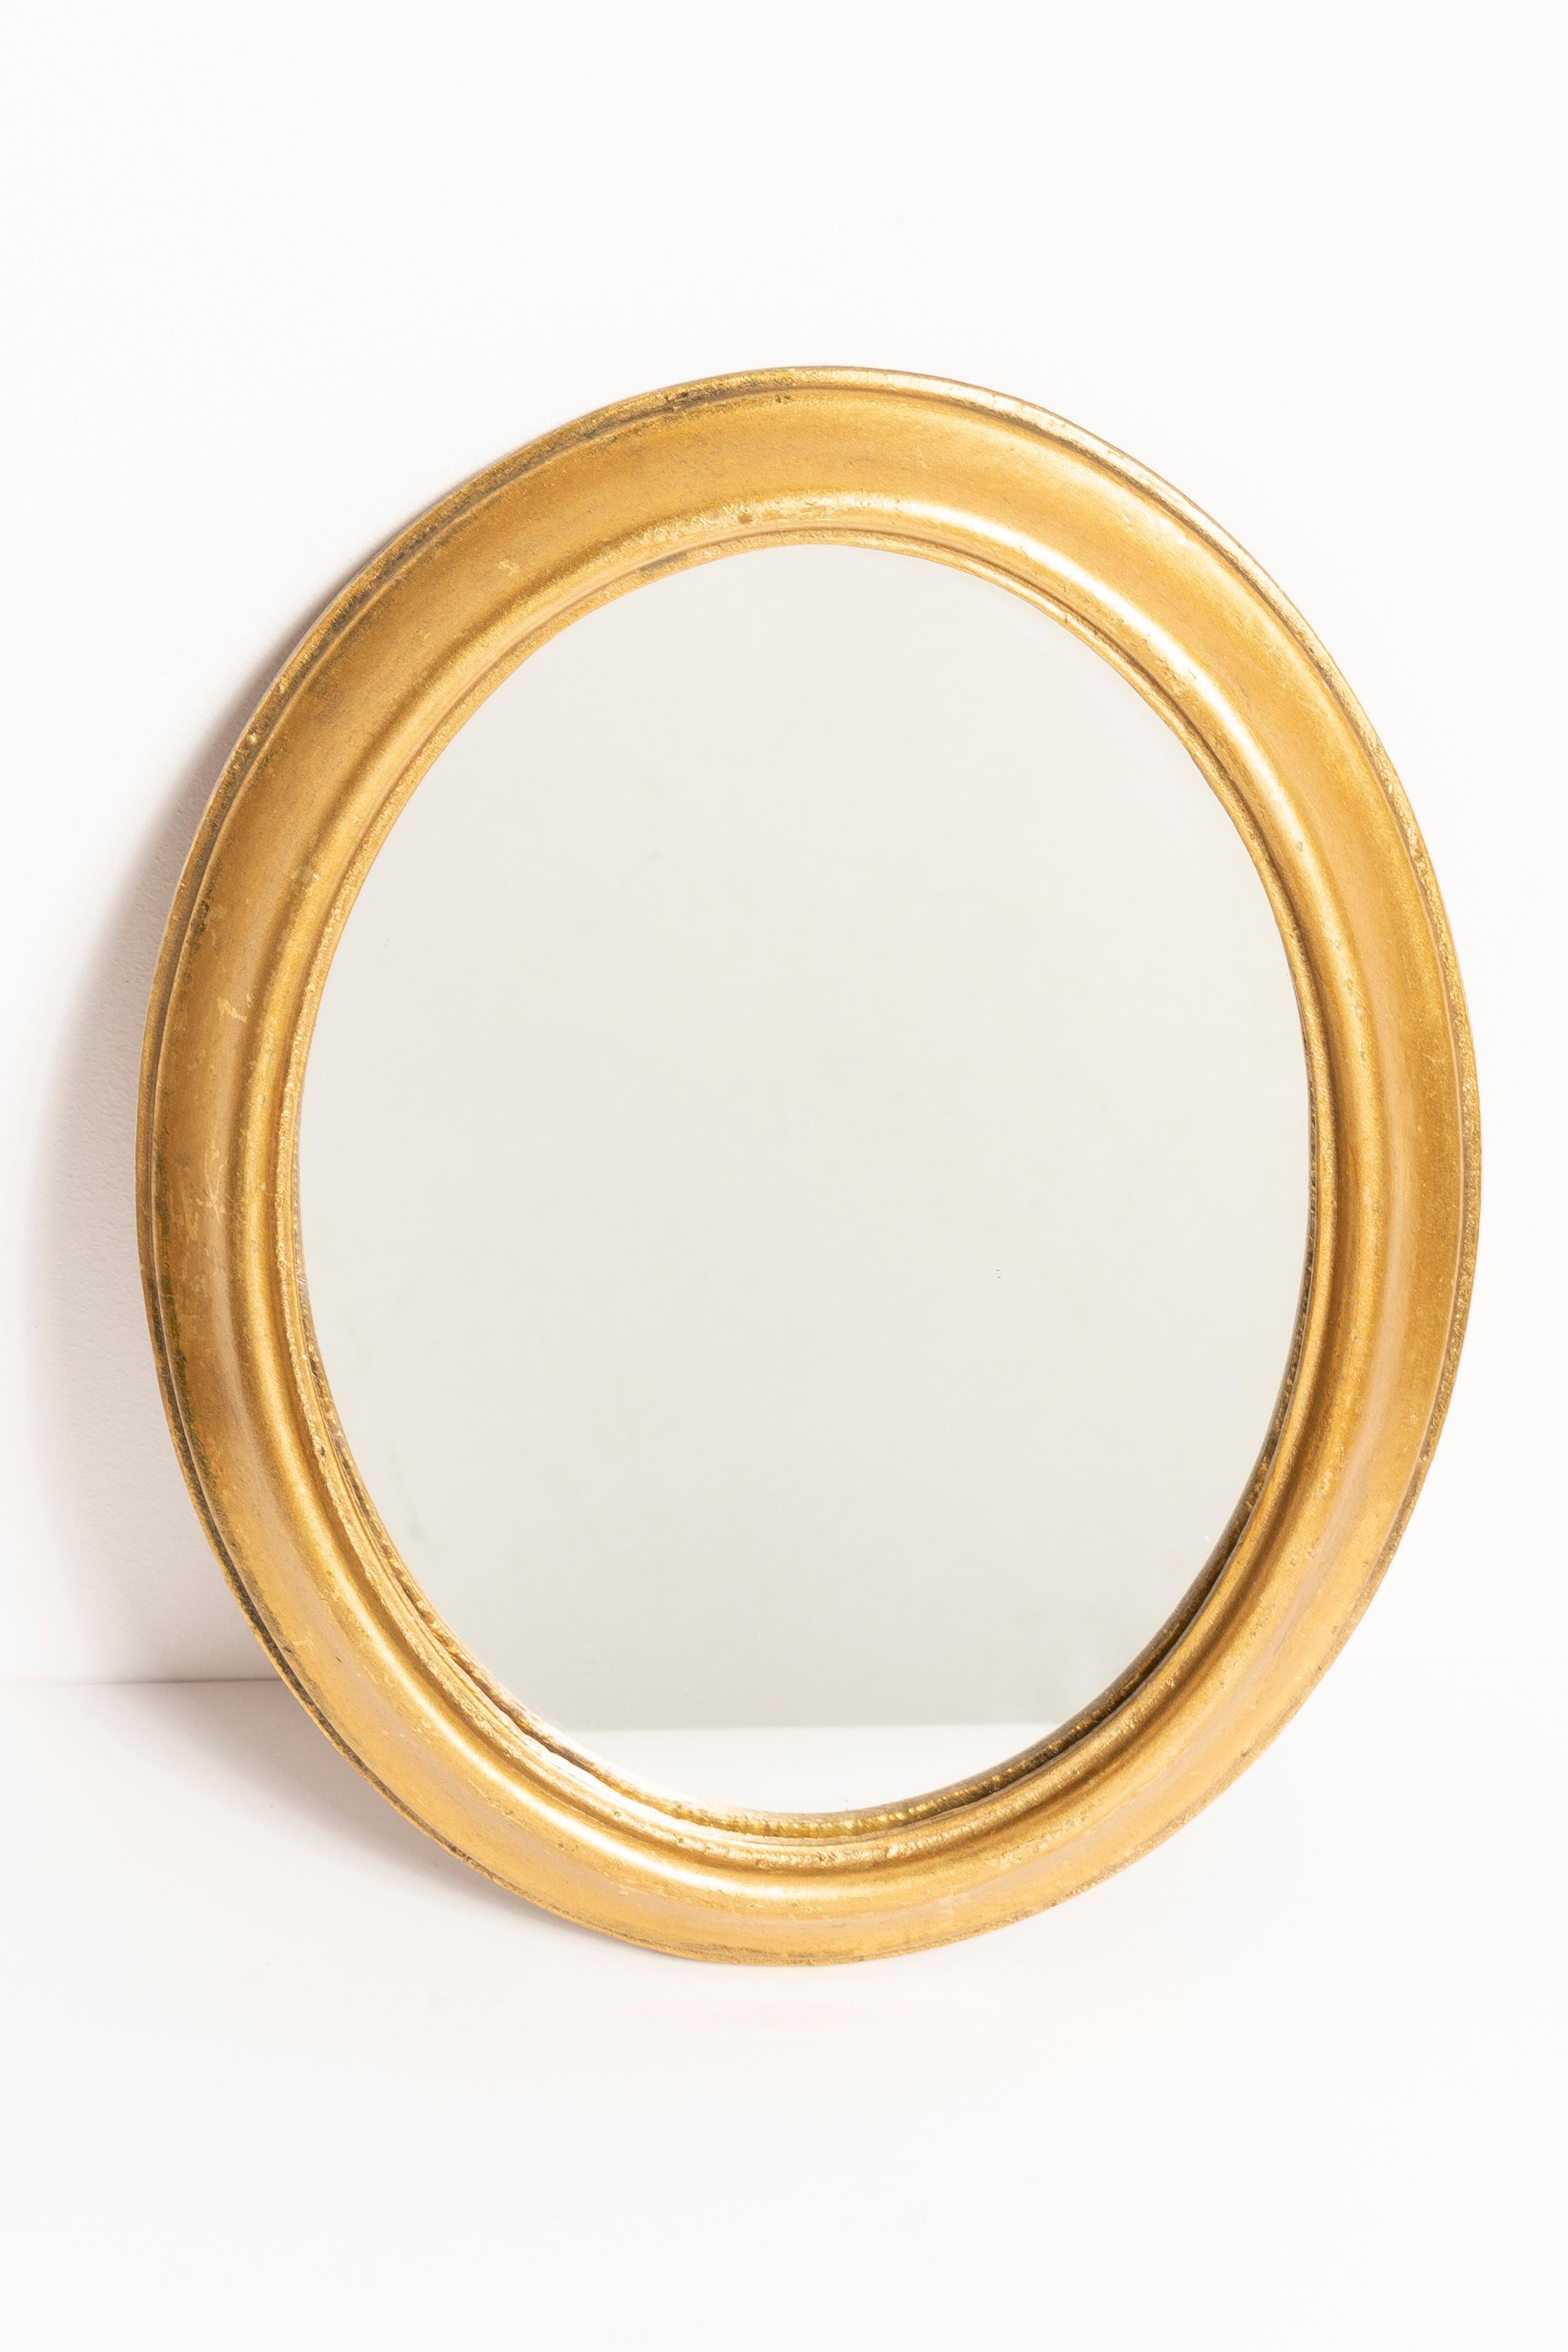 A beautiful small mirror in a golden frame. Produced in 1960s in Italy. The frame is made of wood. Mirror is in very good vintage condition, no damage or cracks in the frame. Original glass. Beautiful piece for every interior! Perfect small gift